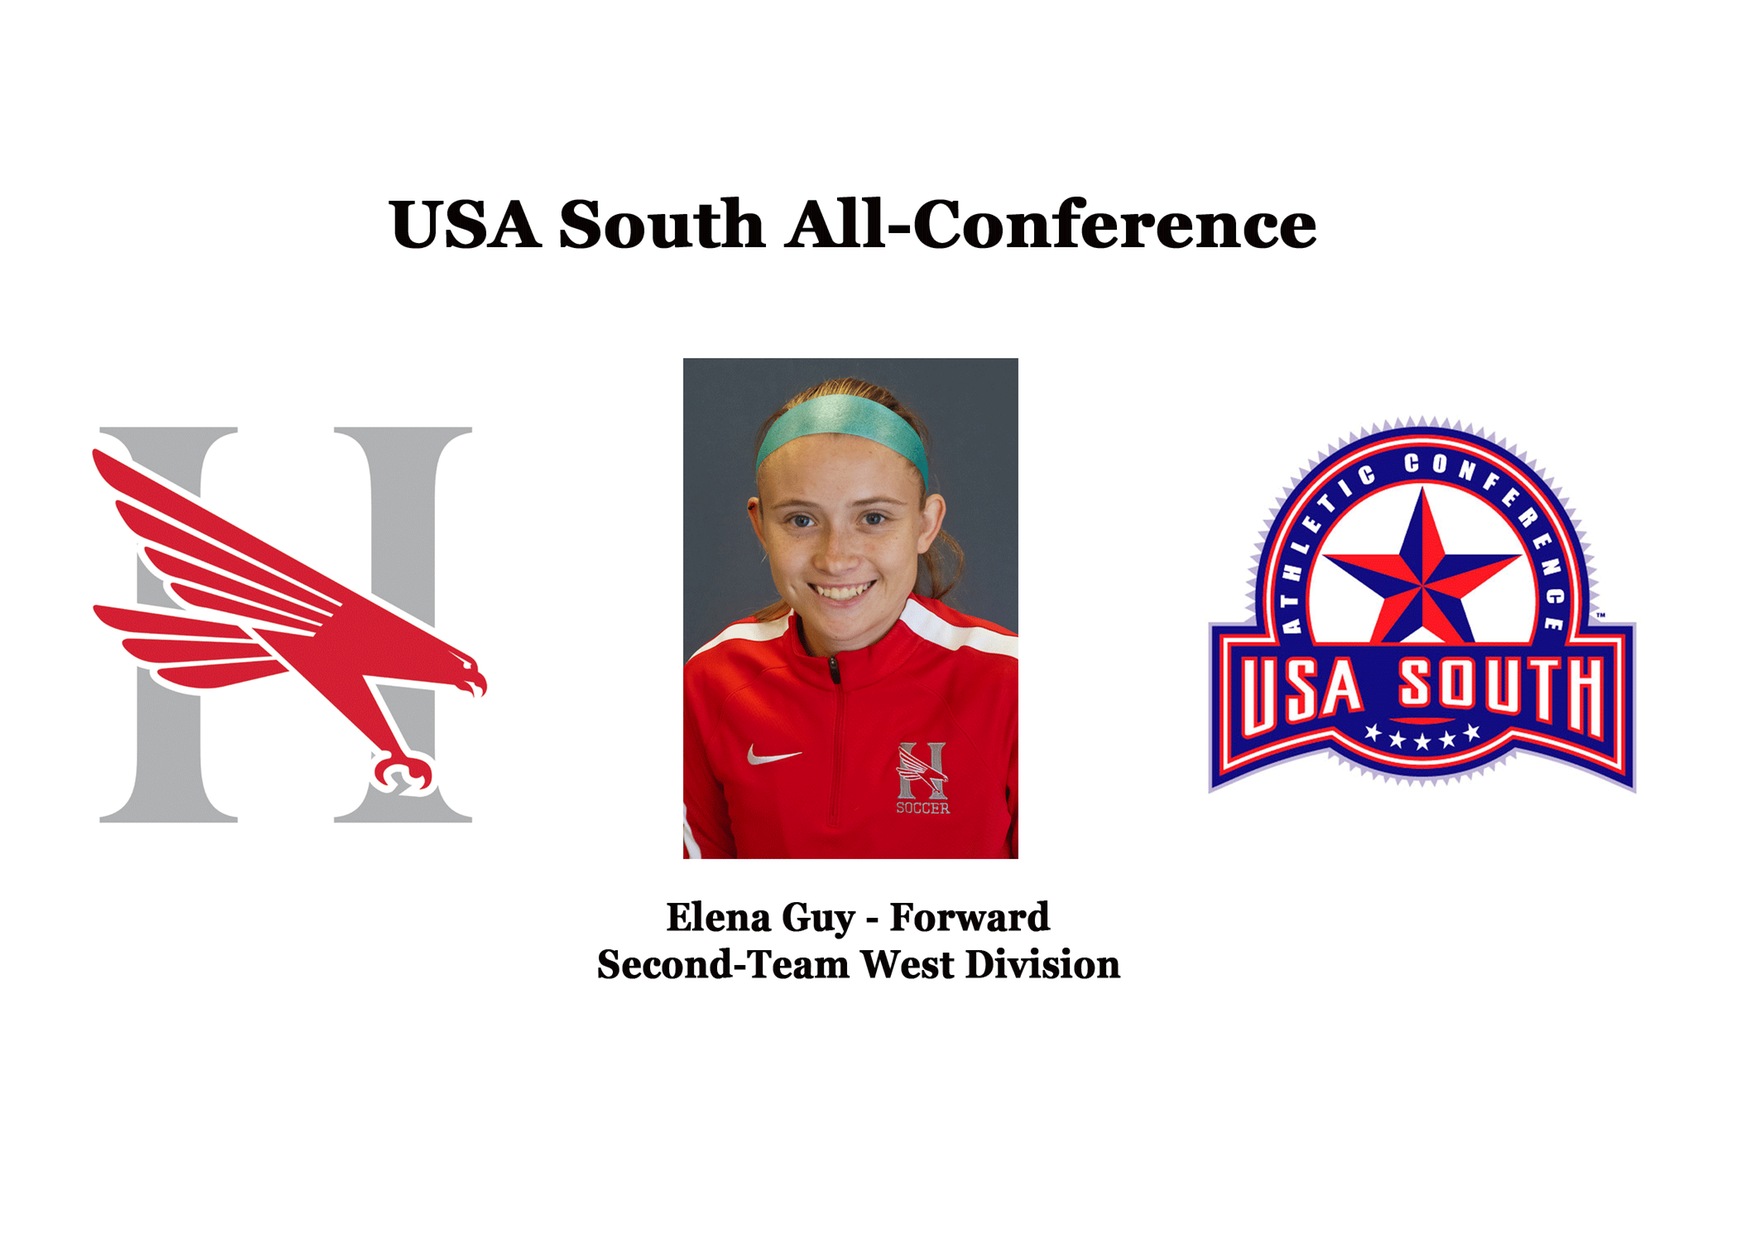 Guy named second-team West Division by the USA South